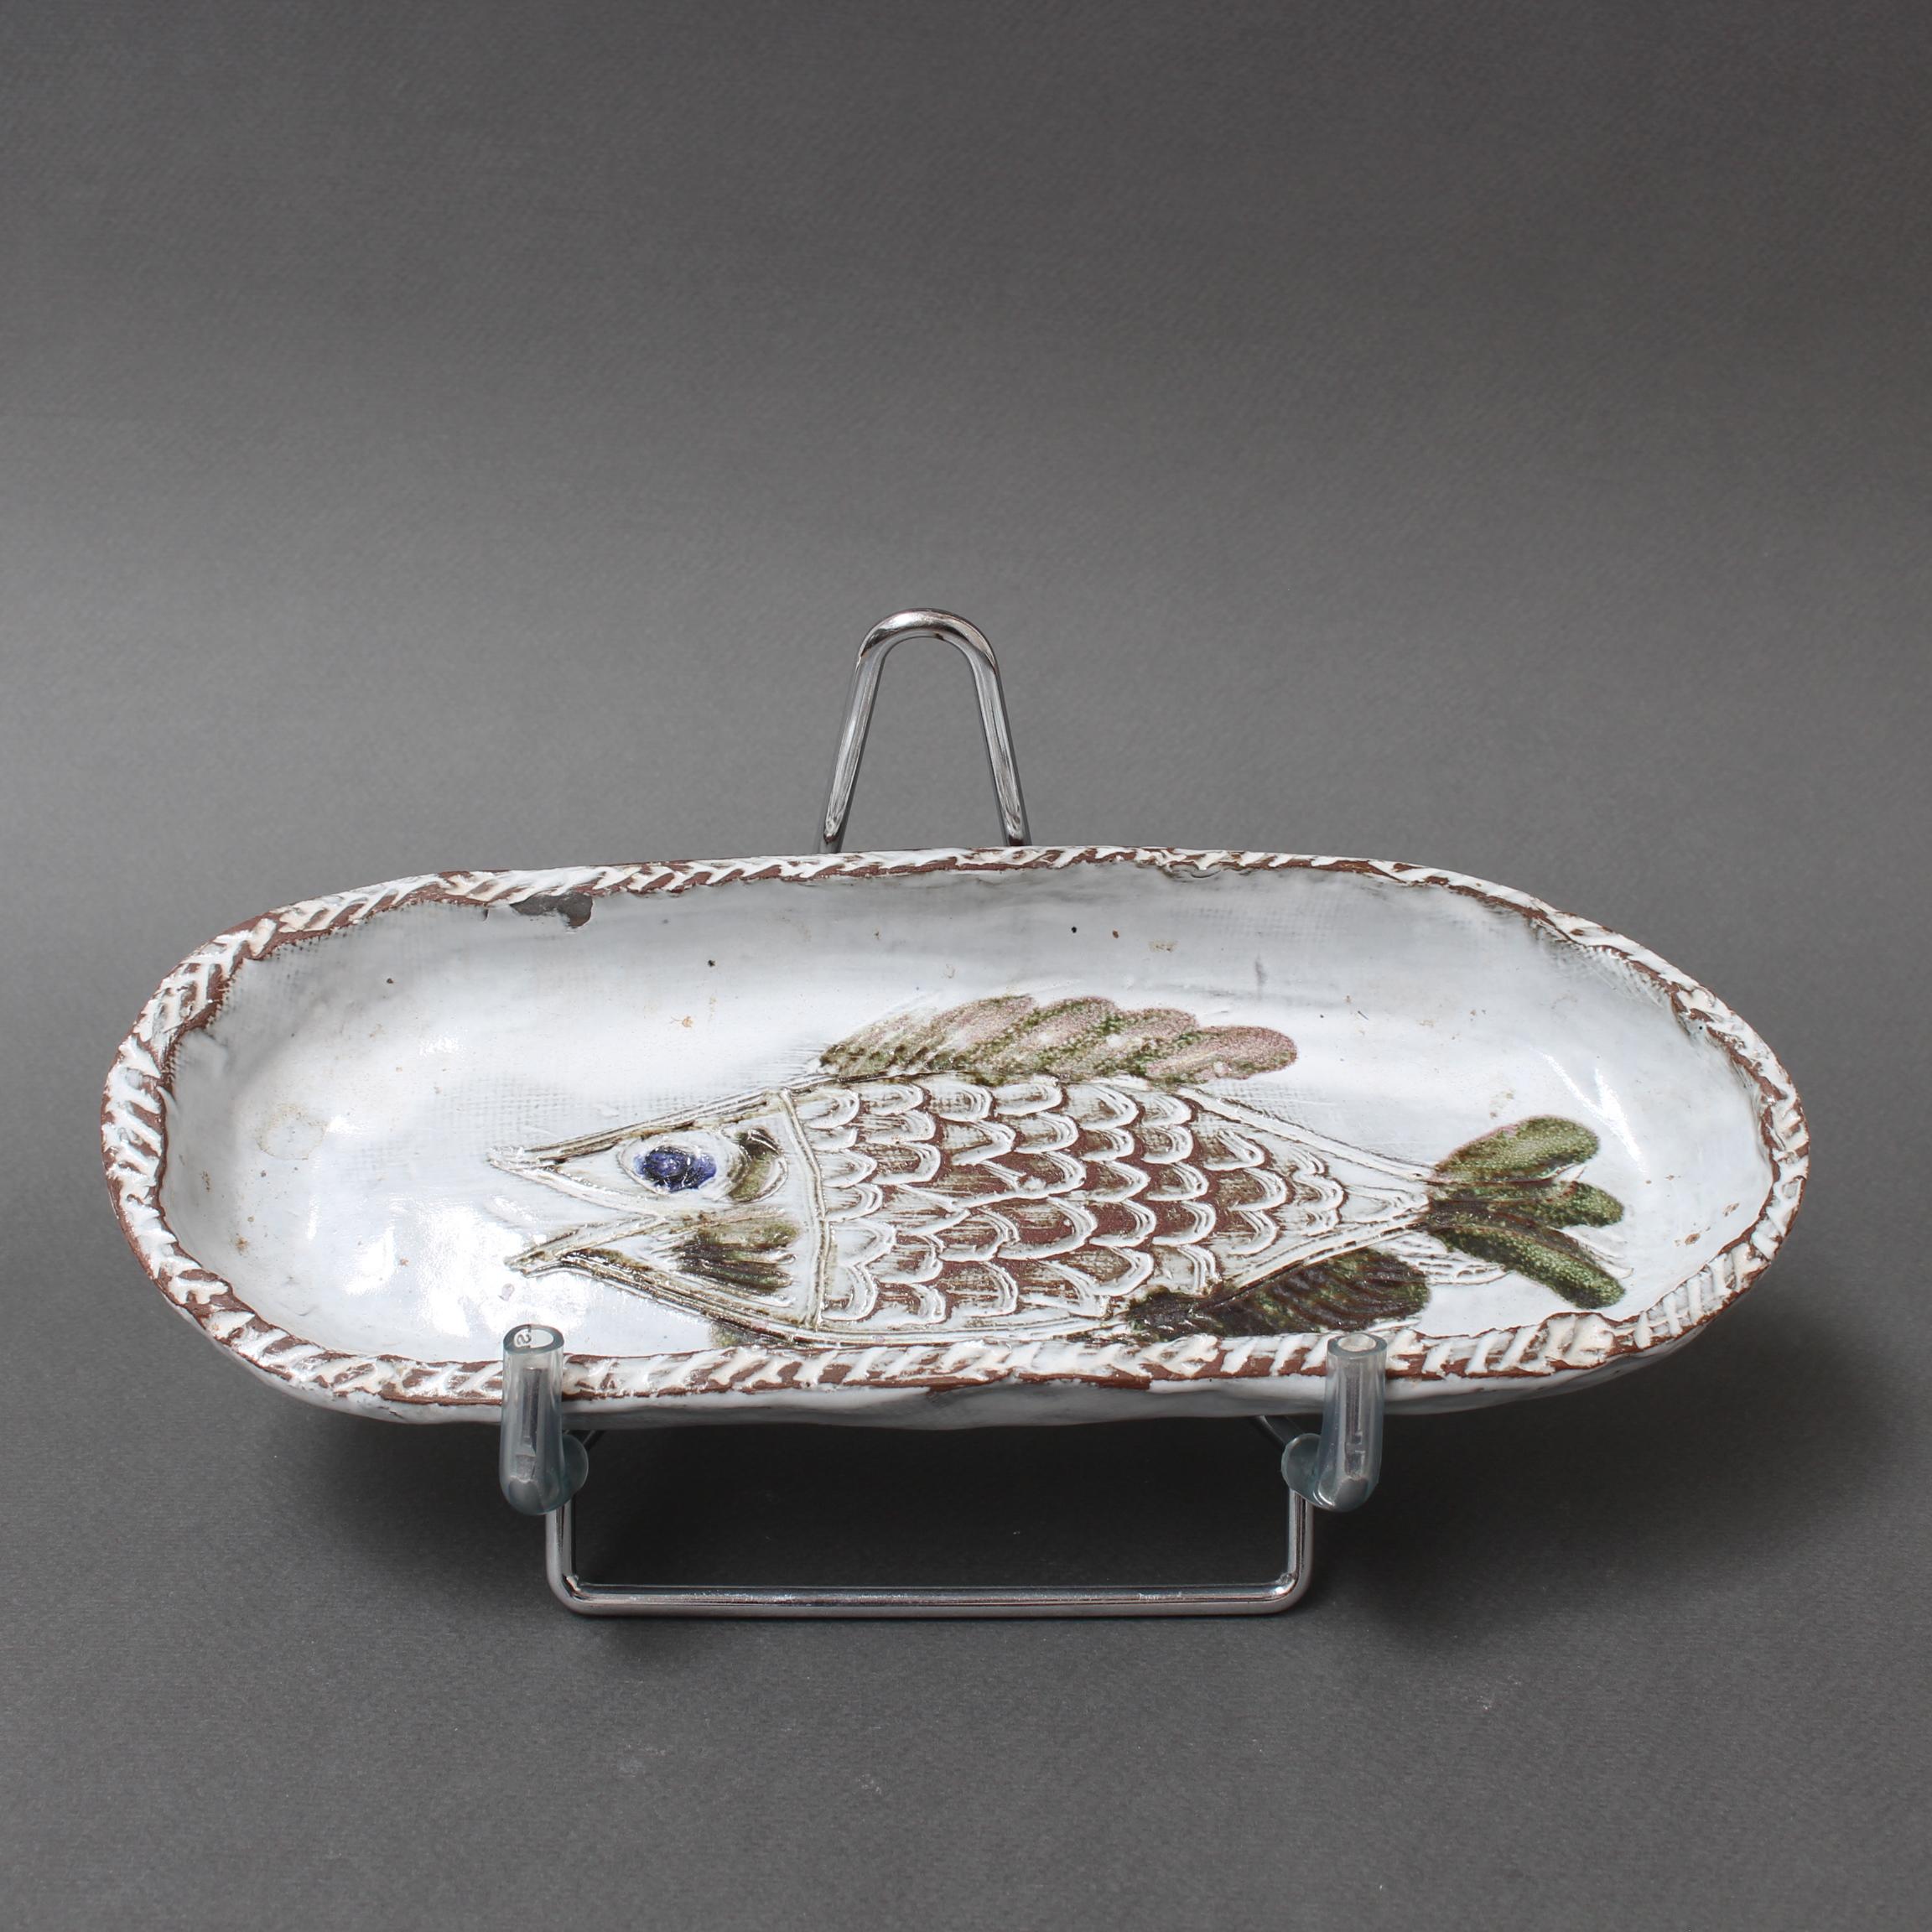 French ceramic decorative dish with fish motif (circa 1970s) by Albert Thiry. An oval-shaped ceramic dish has a chalk-white glaze surface. Within the dish's recess a fish is incised into the glaze and painted in Thiry's trademark brown, blue and